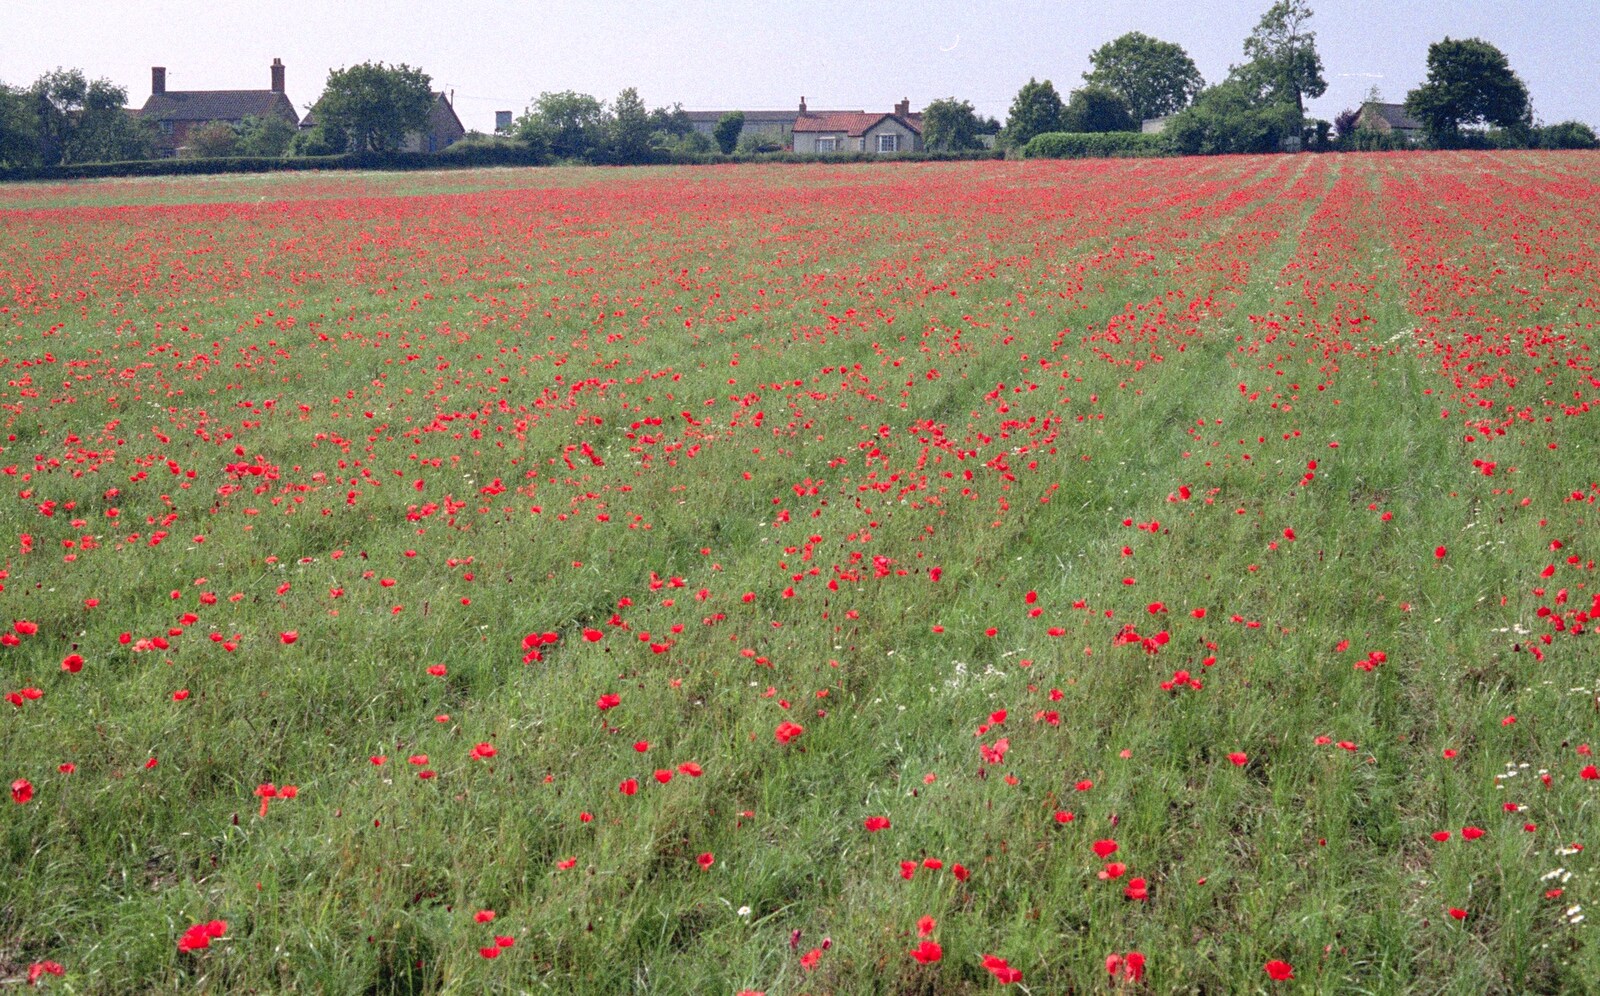 Rows of poppies from Nosher Leaves BPCC Business Magazines, Colchester, Essex - 18th July 1991